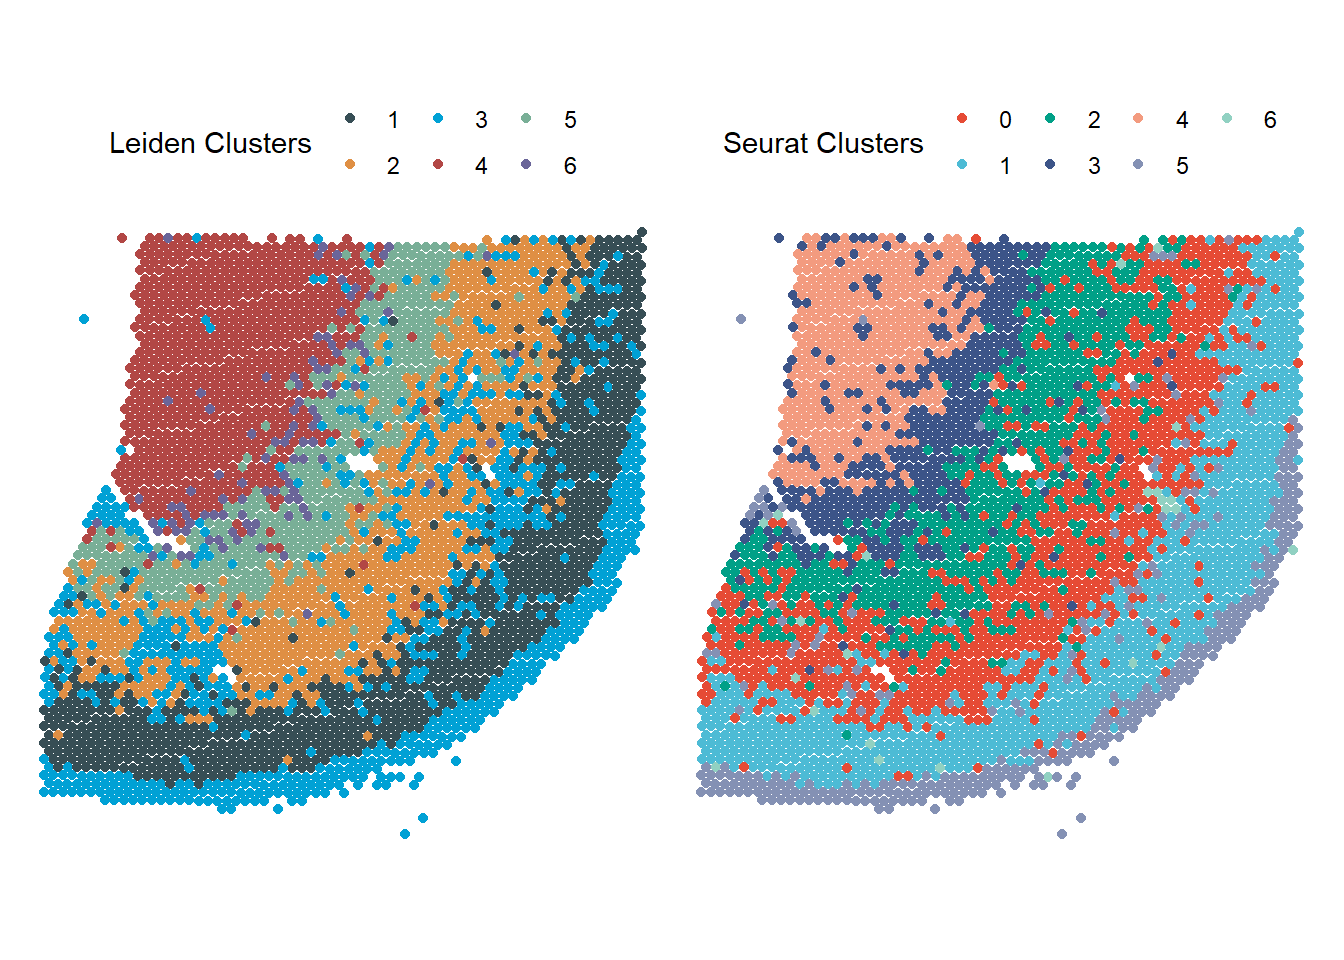 Figure 2.5 Spatial visualization of two different clustering results